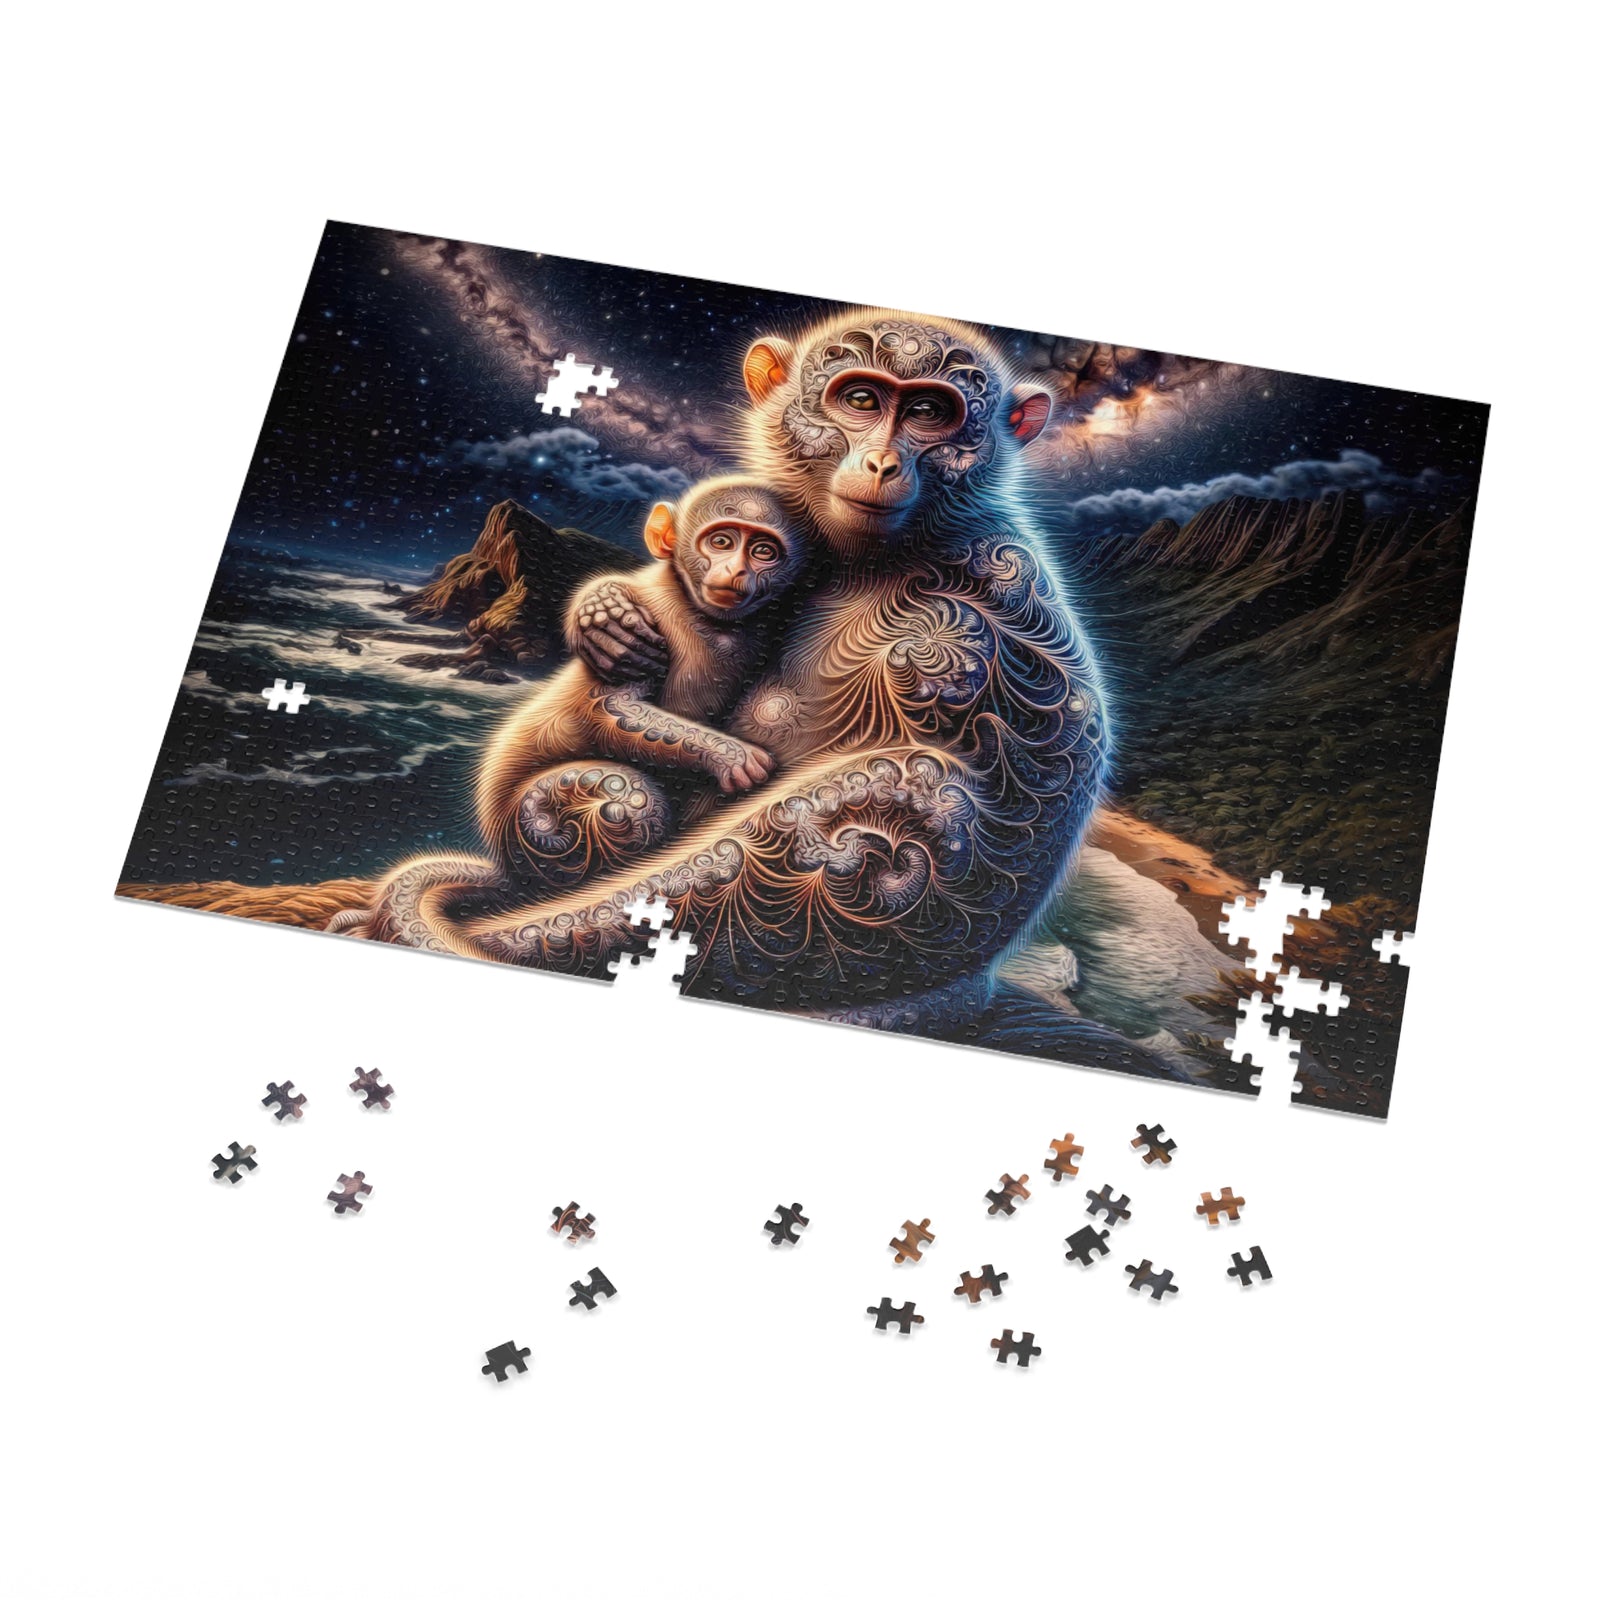 Infinity in a Mother's Embrace Jigsaw Puzzle